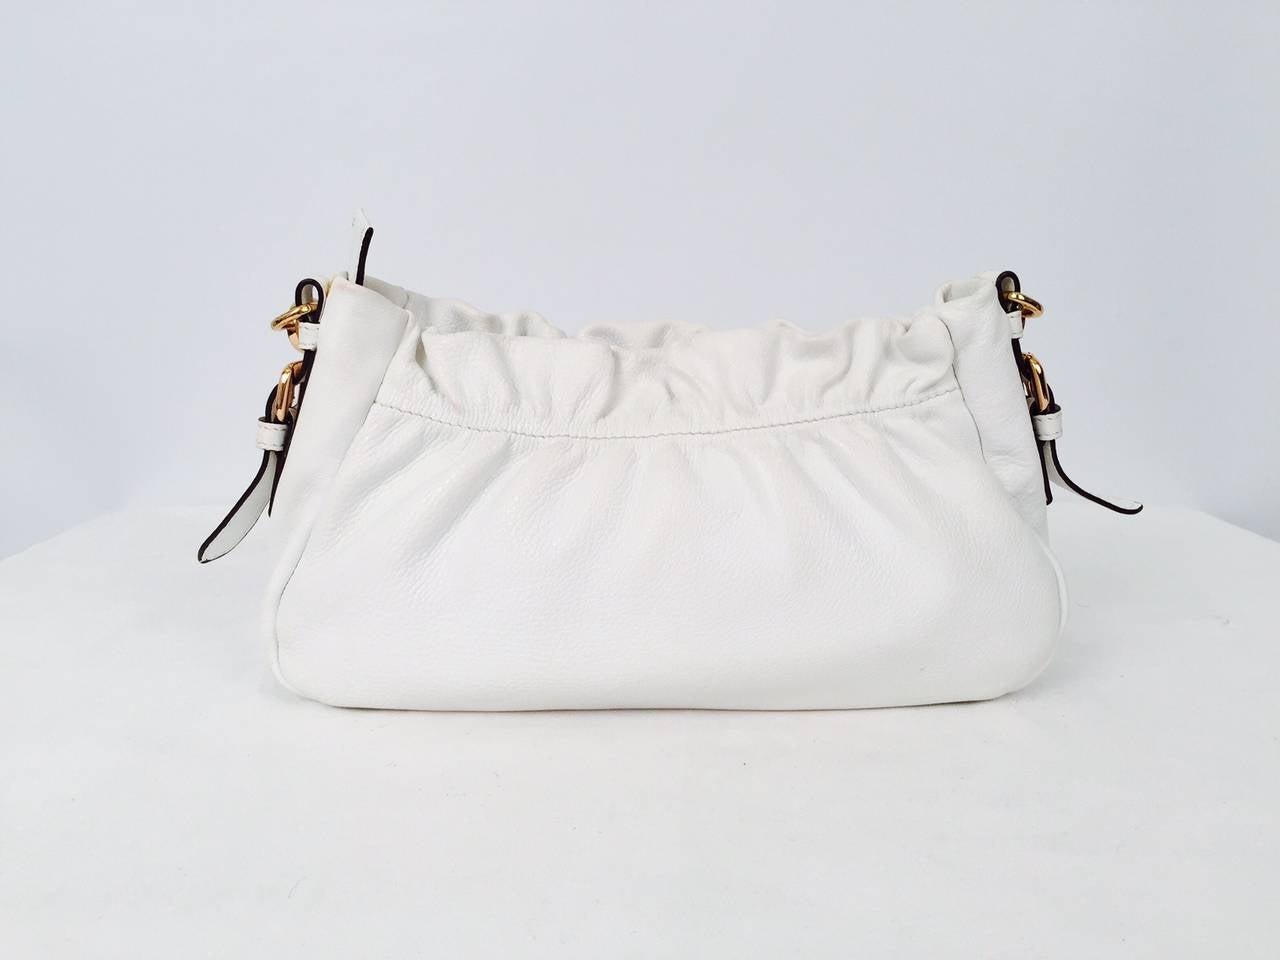 Prada White Bag with Detachable Shoulder Straps is versatility at its best!  Features ultra-luxurious grained leather and gold tone hardware.  Slightly gathered, bag has top zipper and top stitched bow on front.  Interior is lined in durable, yet